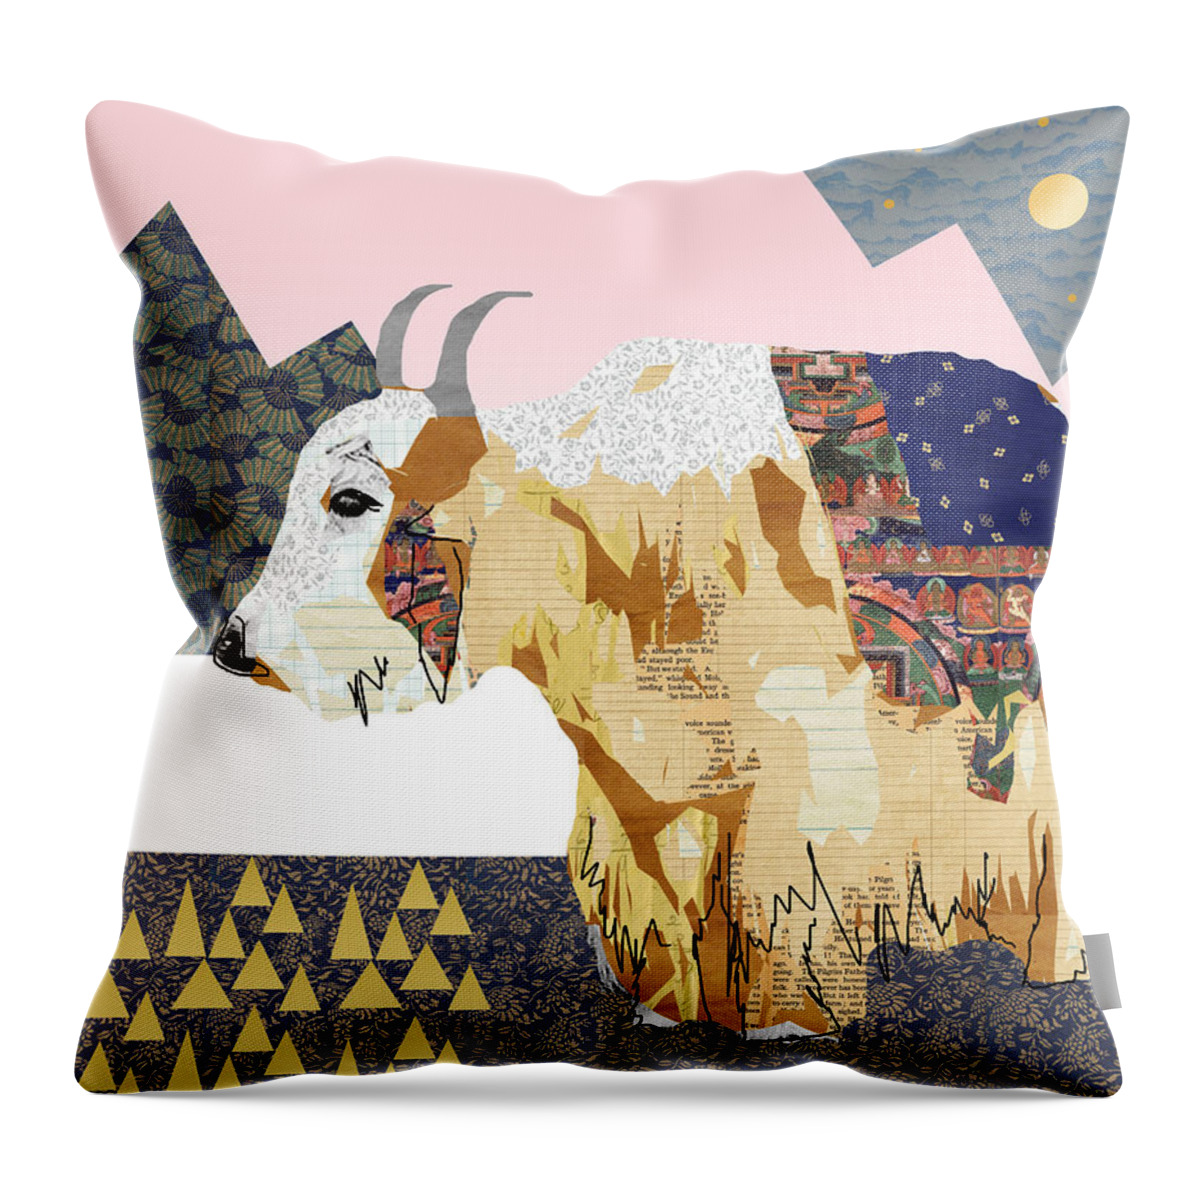 Tibet Throw Pillow featuring the mixed media Tibet Yak Collage by Claudia Schoen